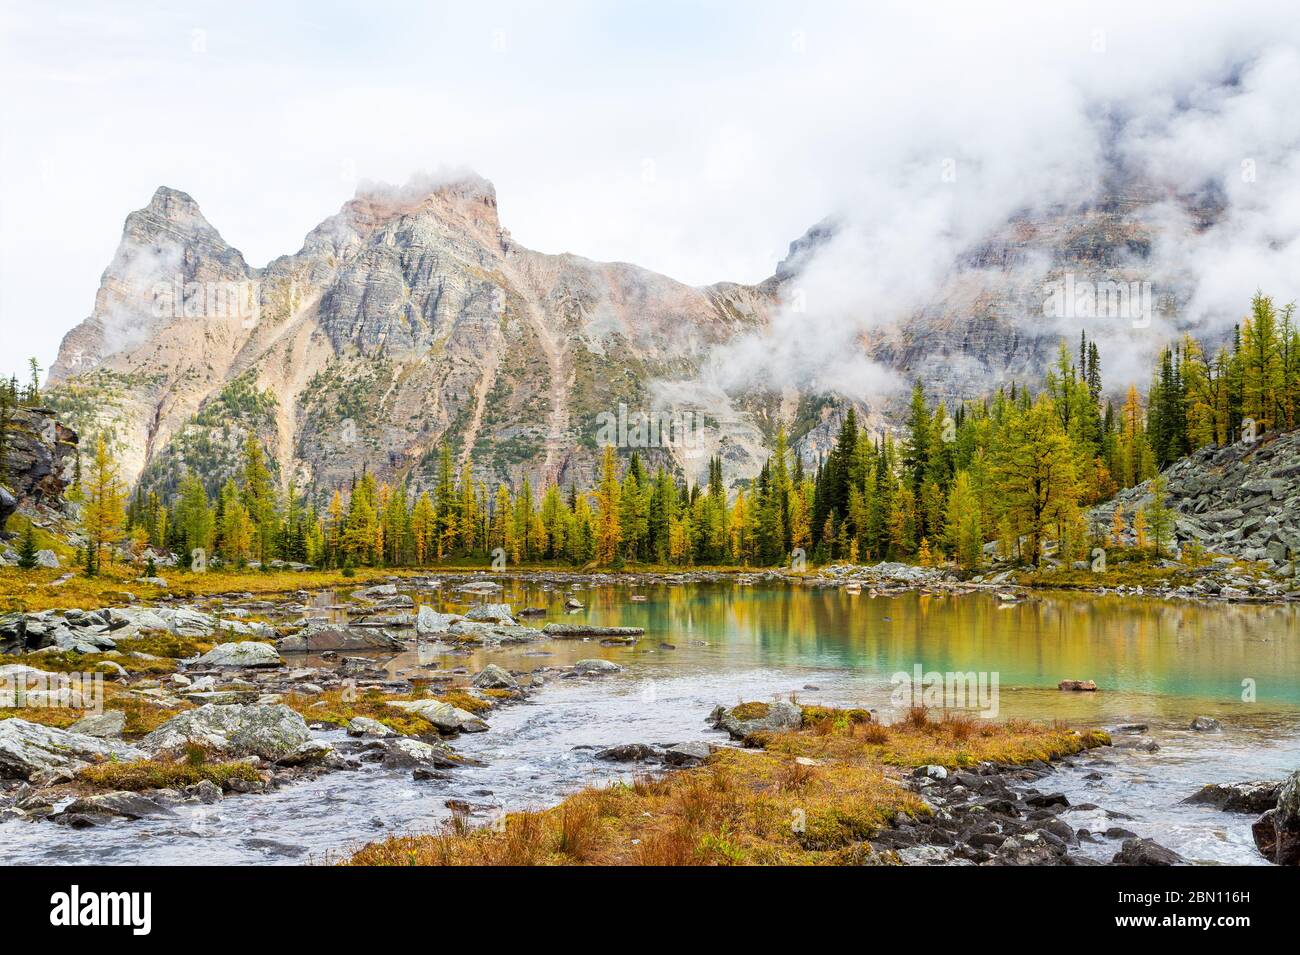 Autumn scene at Lake O'Hara in the Canadian Rockies of Yoho National Park with larch trees turning golden on Moor Lakes and heavy fog on Yukness Mount Stock Photo